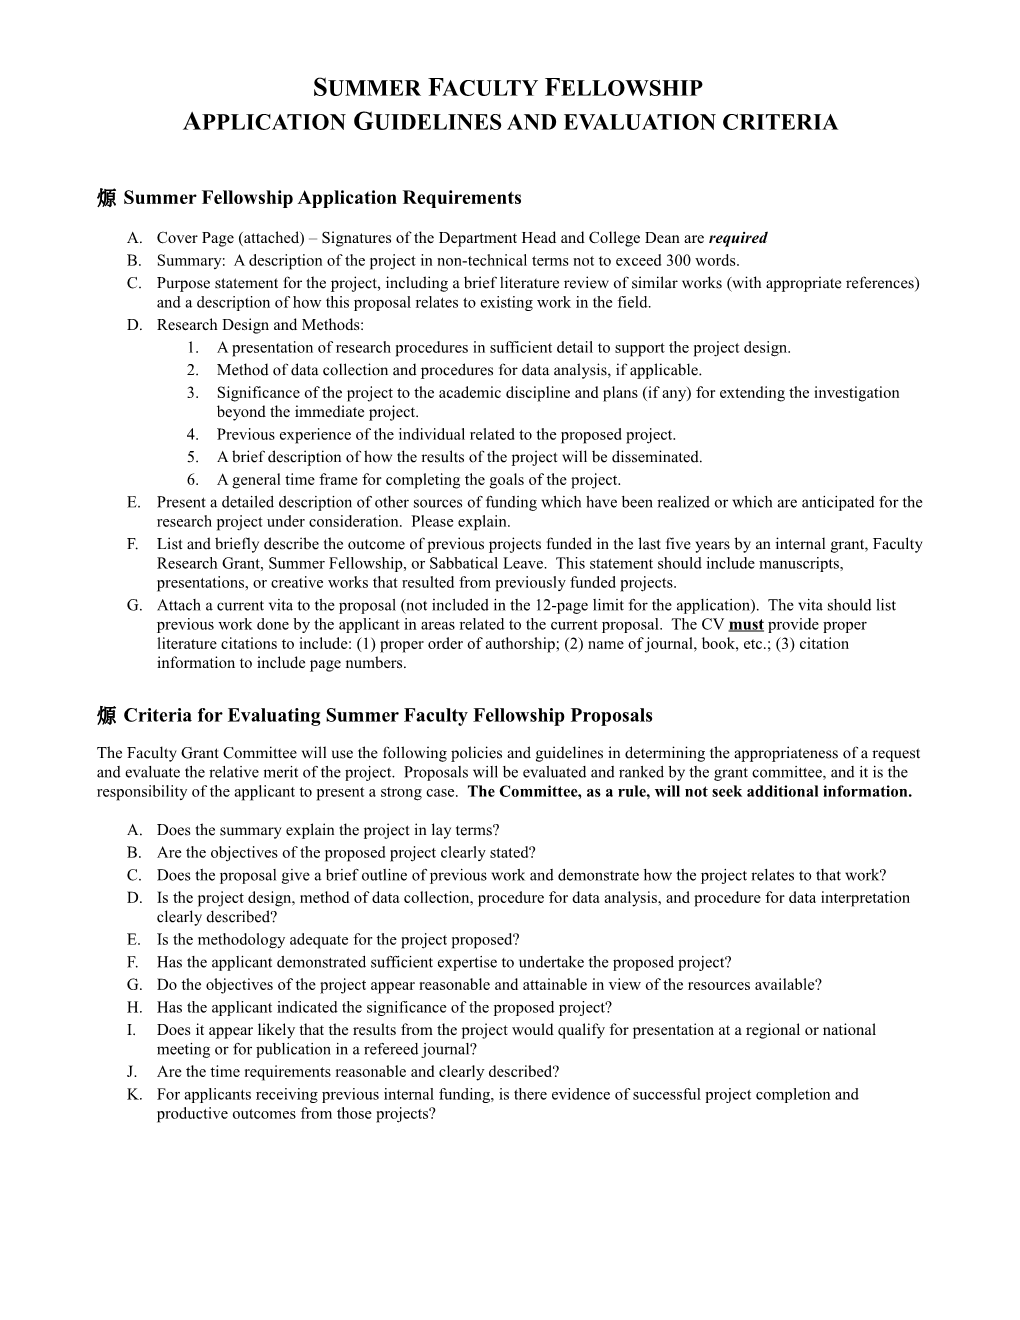 Application Guidelines and Evaluation Criteria